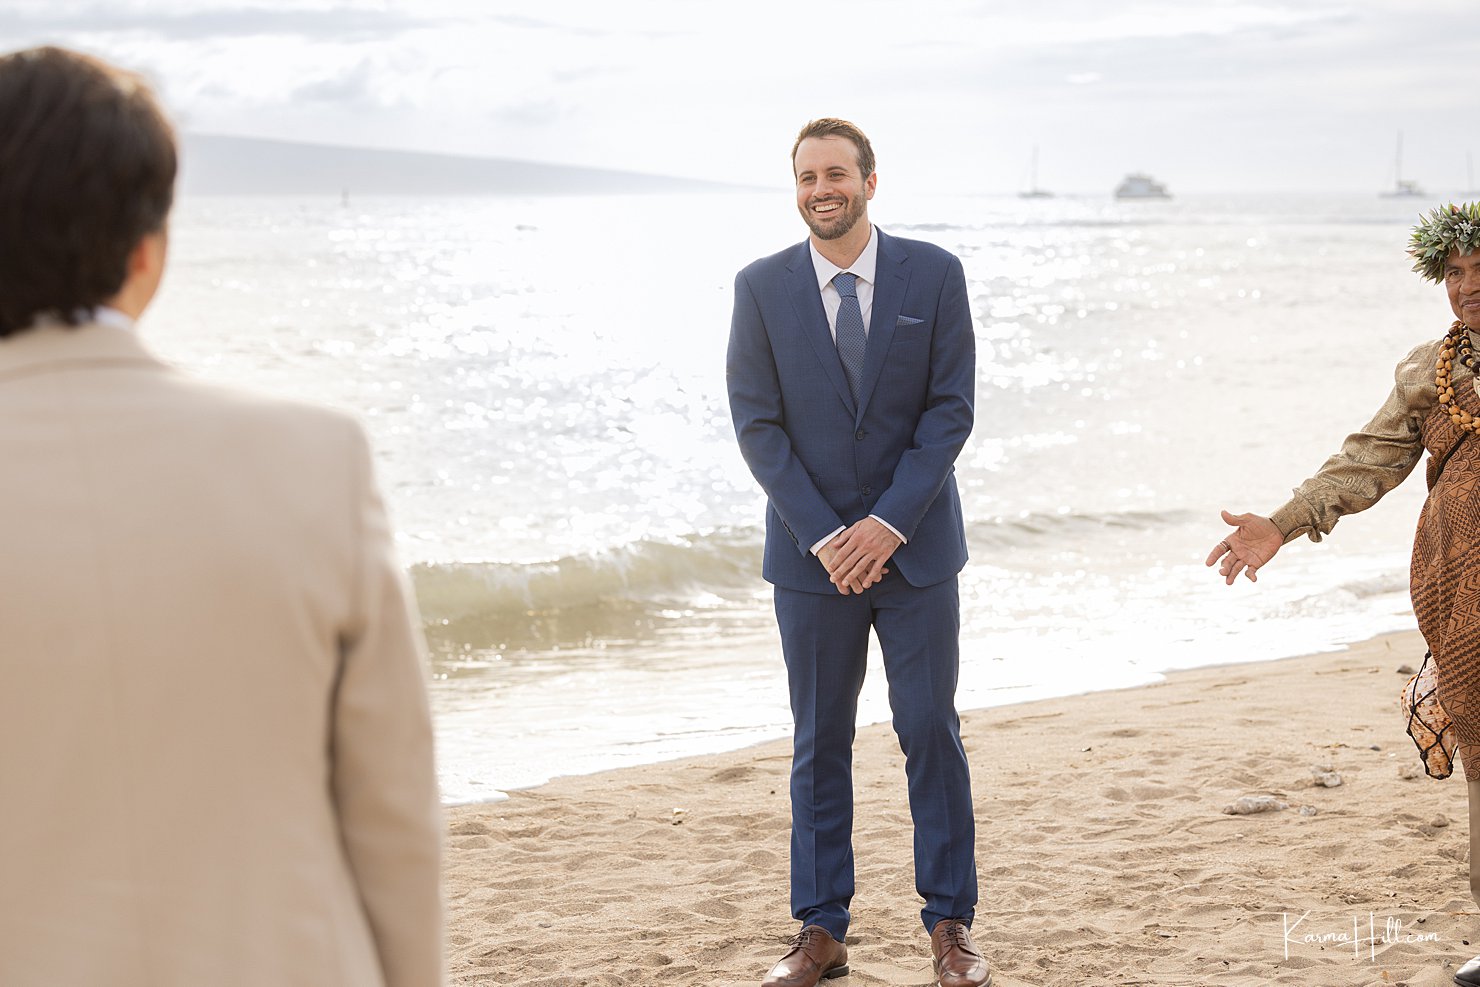 A groom sees his bride for the first time during their Hawaii wedding ceremony on the beach.